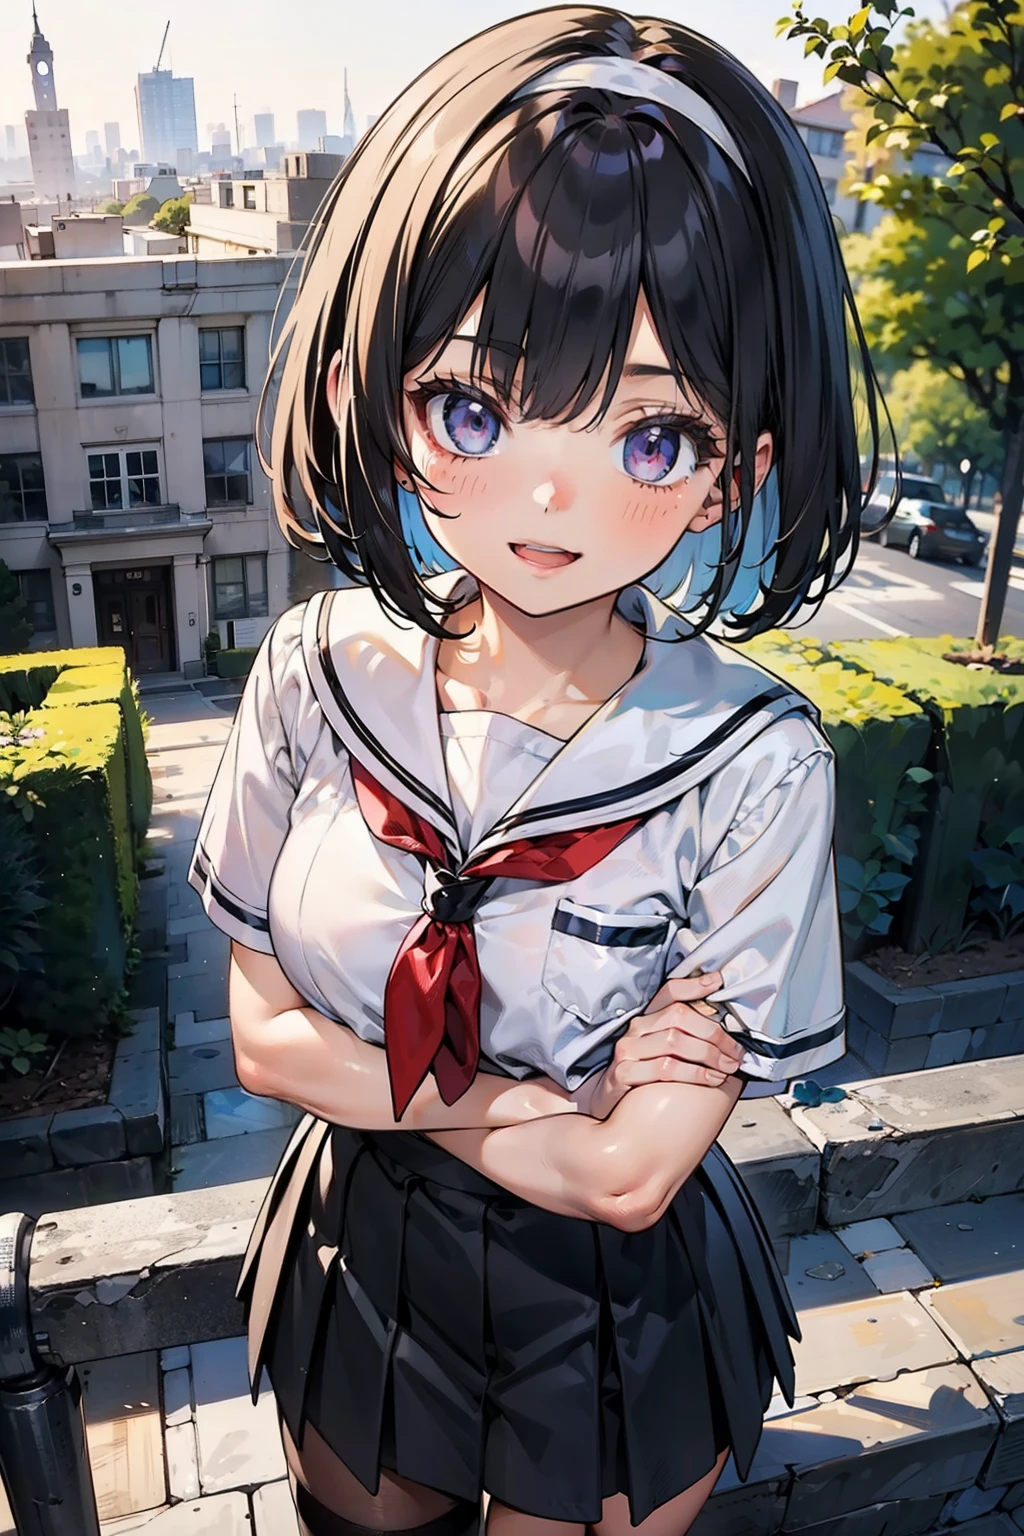 body 8 times longer than head, (Highly detailed CG unity 8k), (highest quality)，(very detailed)，(ultra high resolution), black hair, High school girl wearing a navy sailor suit, Anime 2D rendering, realistic young anime high school girl, ((White headband)), purple eyes, small breasts, tall, slanted eyes, (school scenery), black stockings, bright color, open your mouth, Dark blue skirt, bob cut, position looking down from above, Face upwards, smile, spread both arms, embrace,